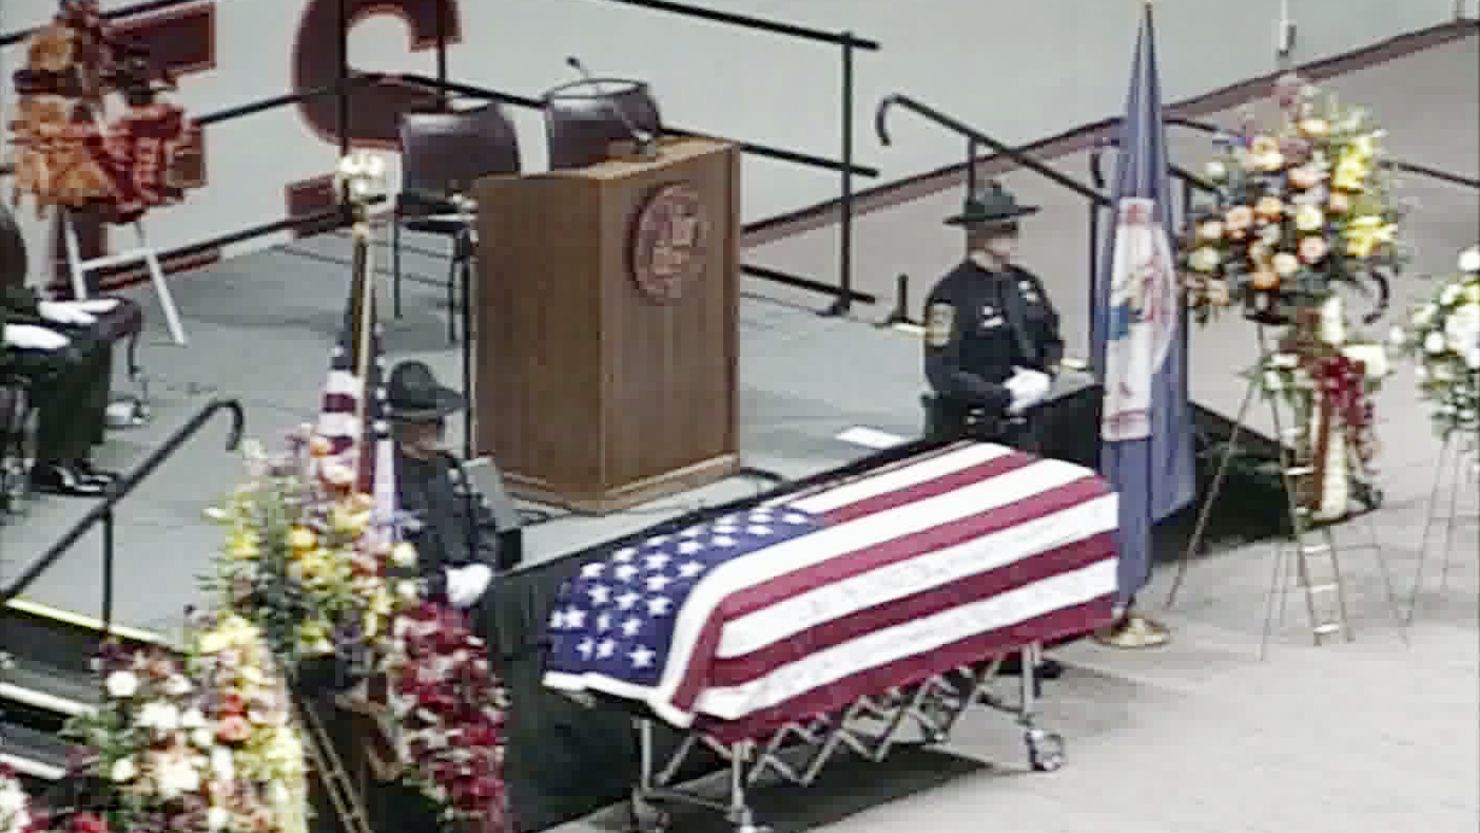 Police officers stand guard Monday over the casket of Deriek Crouse, the Virginia Tech officer who was shot to death last week.